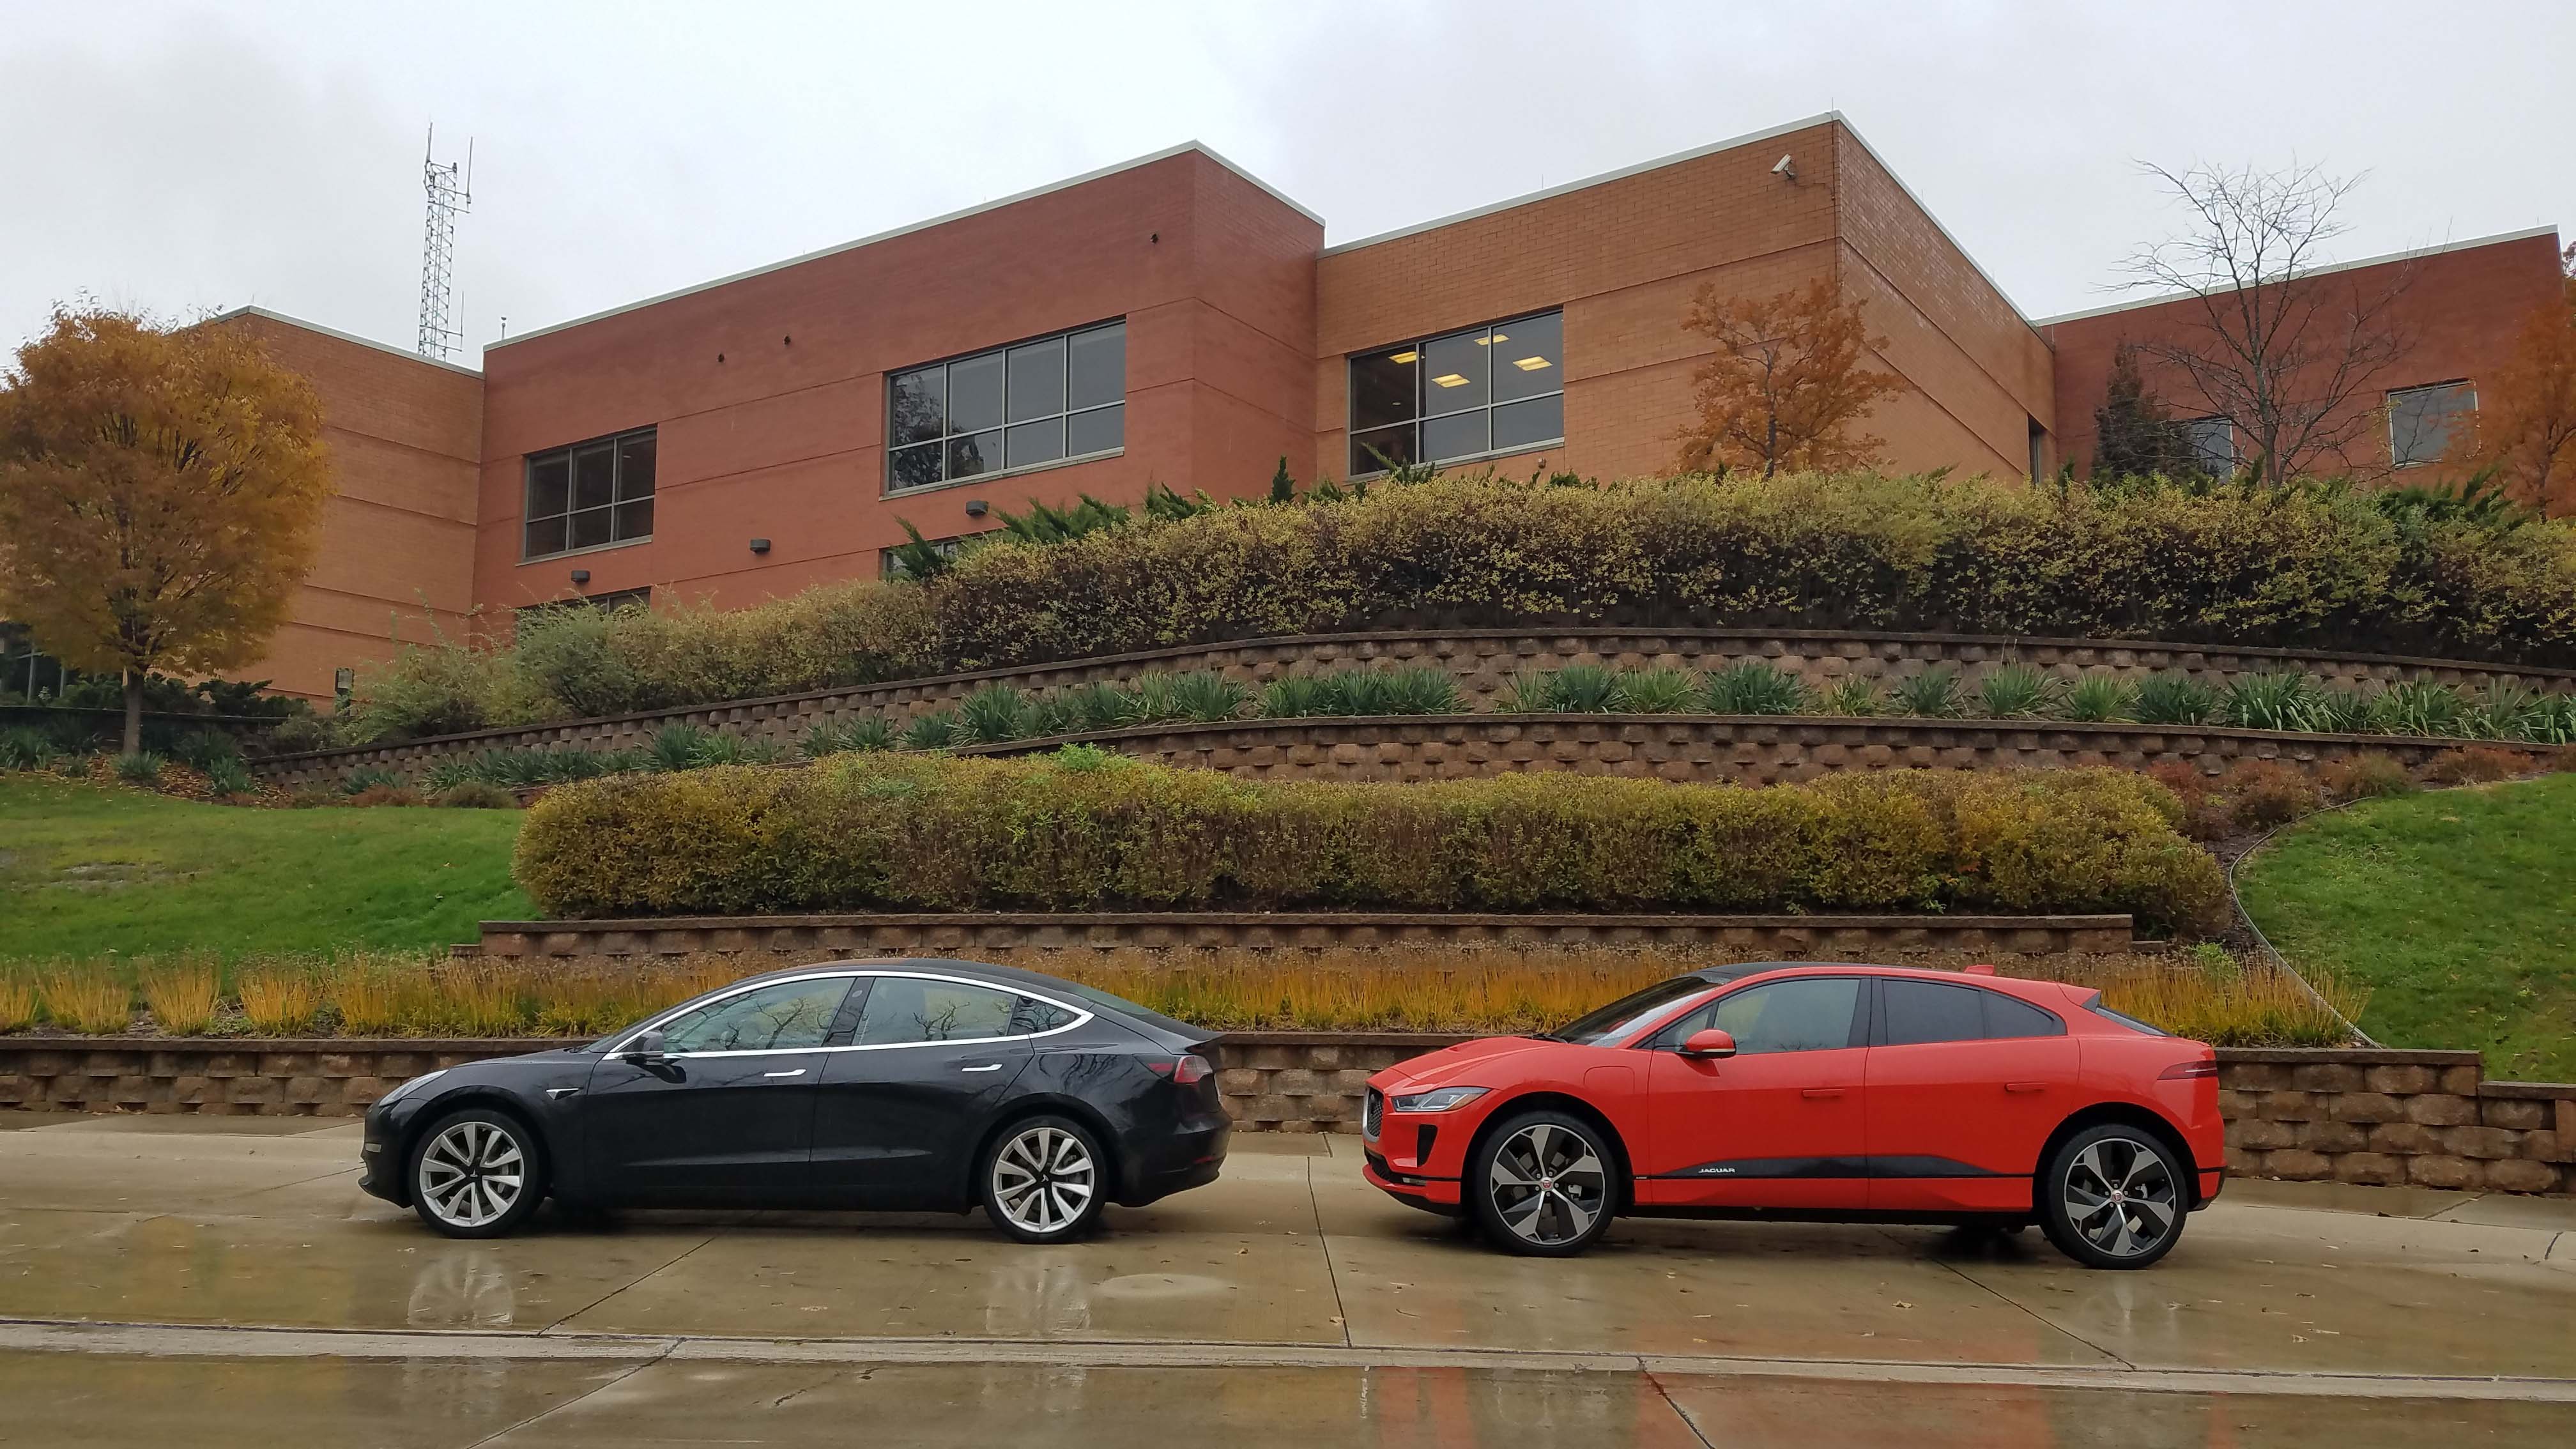 The Tesla Model 3's styling simplicity is striking next to fellow EV Jaguar I-Pace. The interior is even more spare.